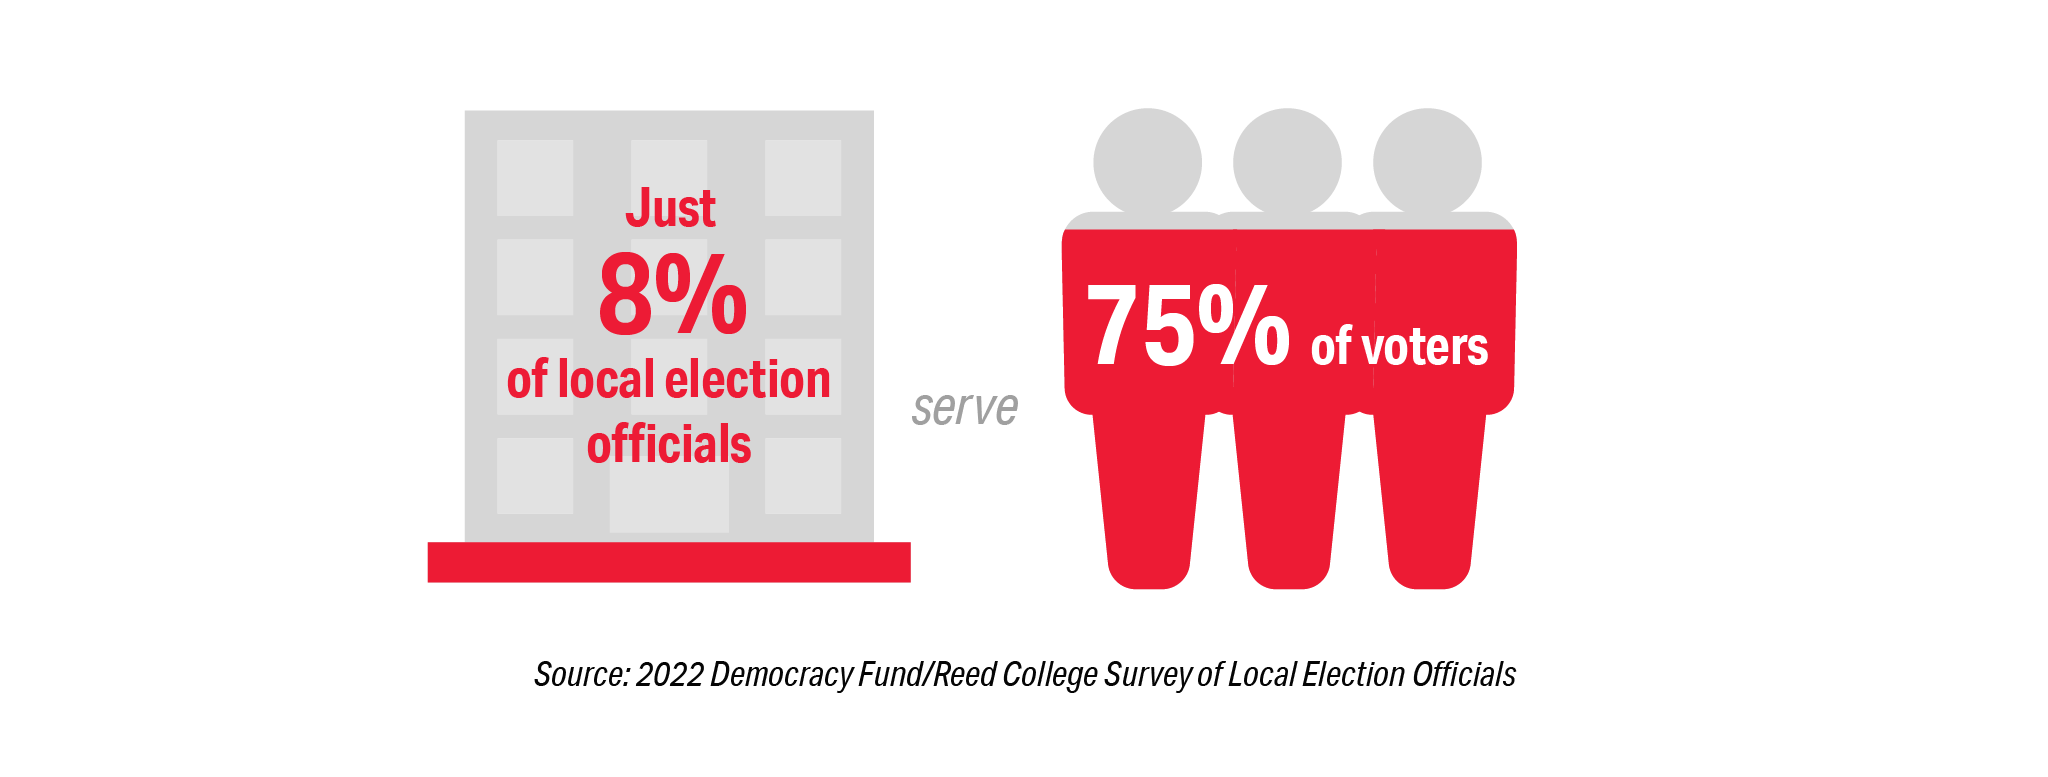 Graphic of building and people stating that 8% of local election officals serve 75% of voters